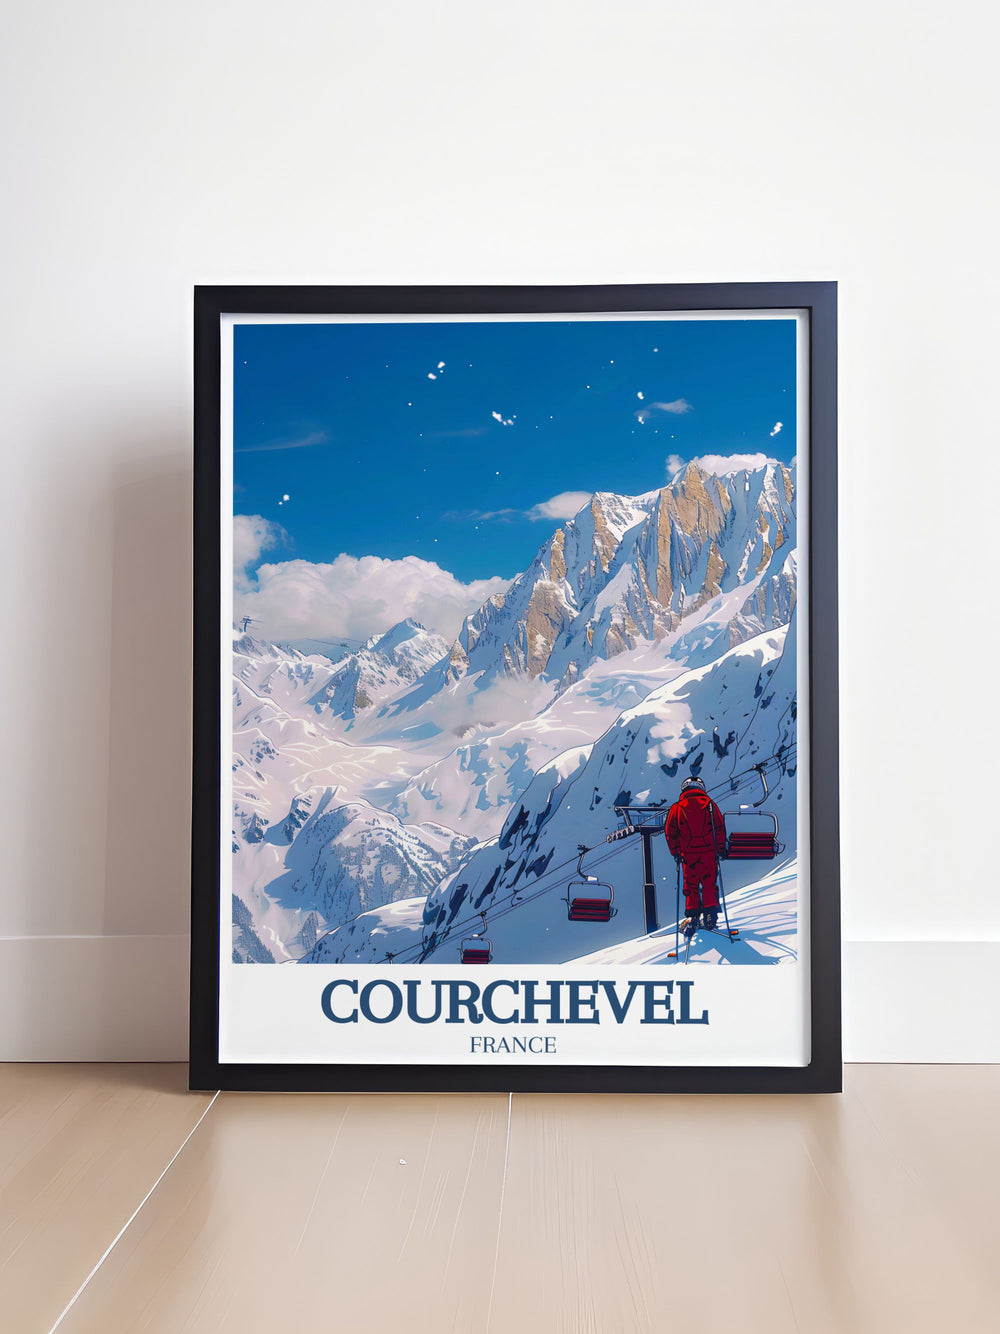 a poster of a person on a ski slope